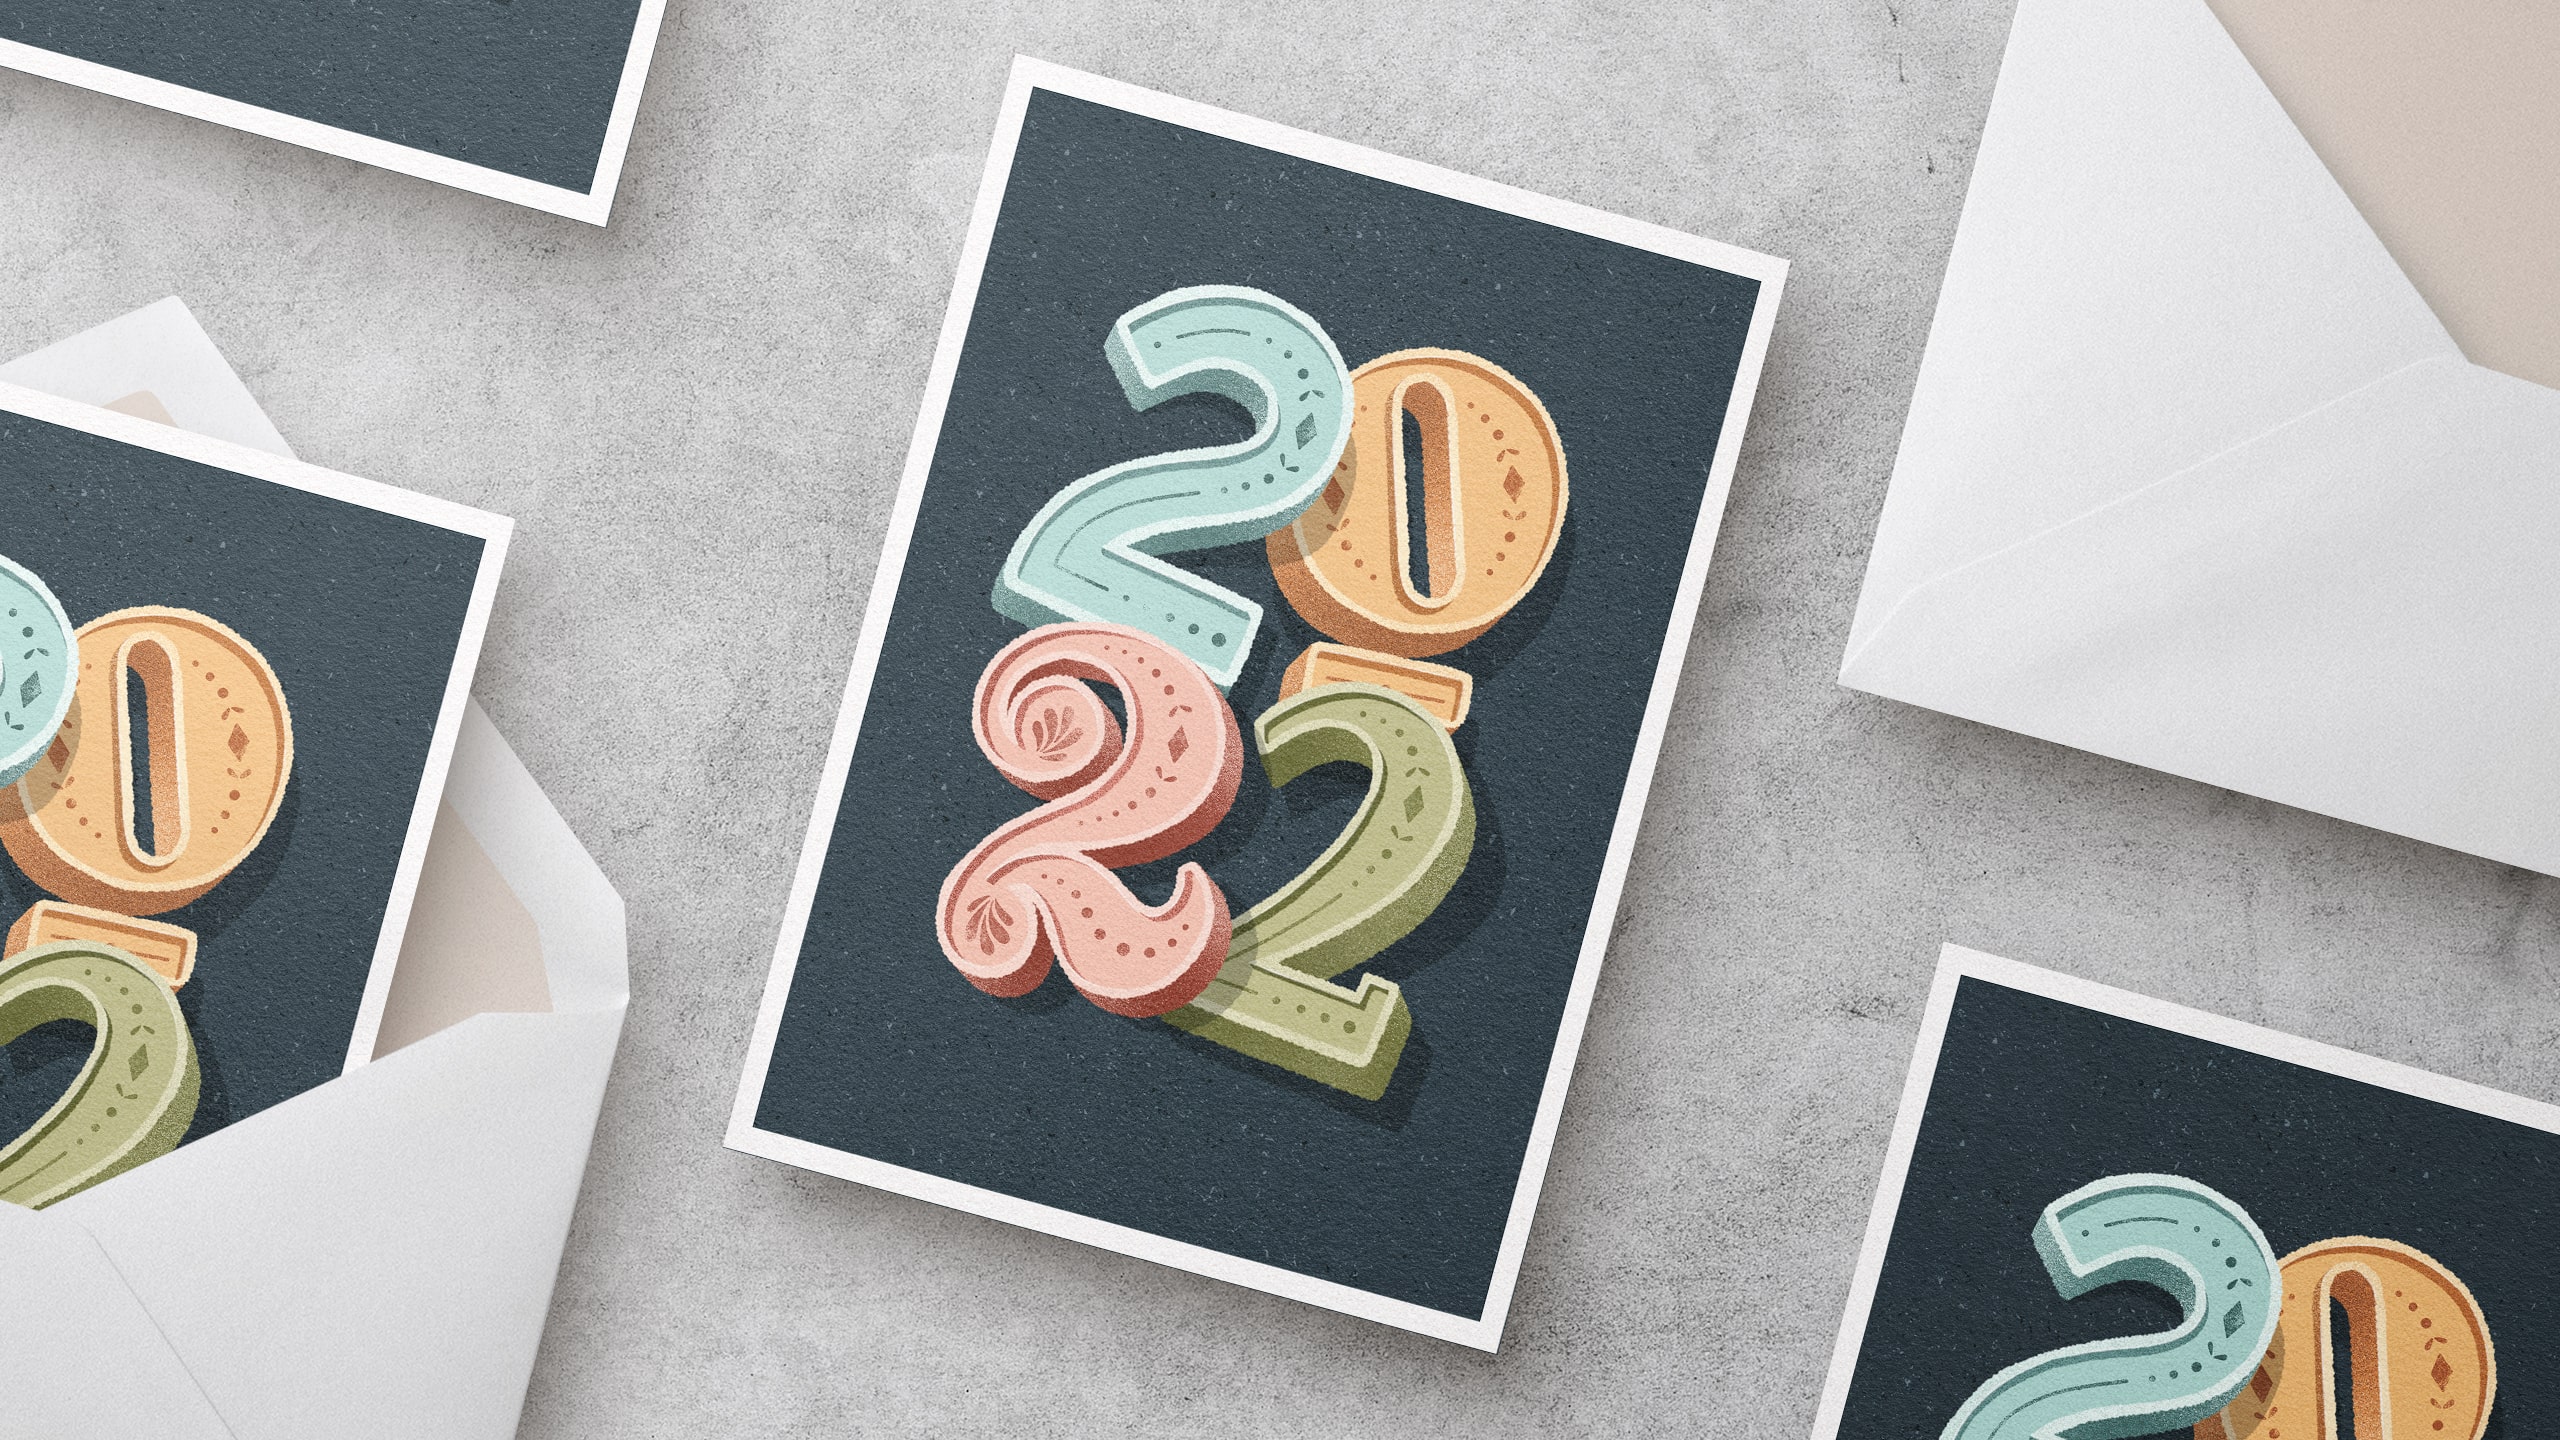 Handlettered Postcard with 3D numbers "2022" with envelopes.